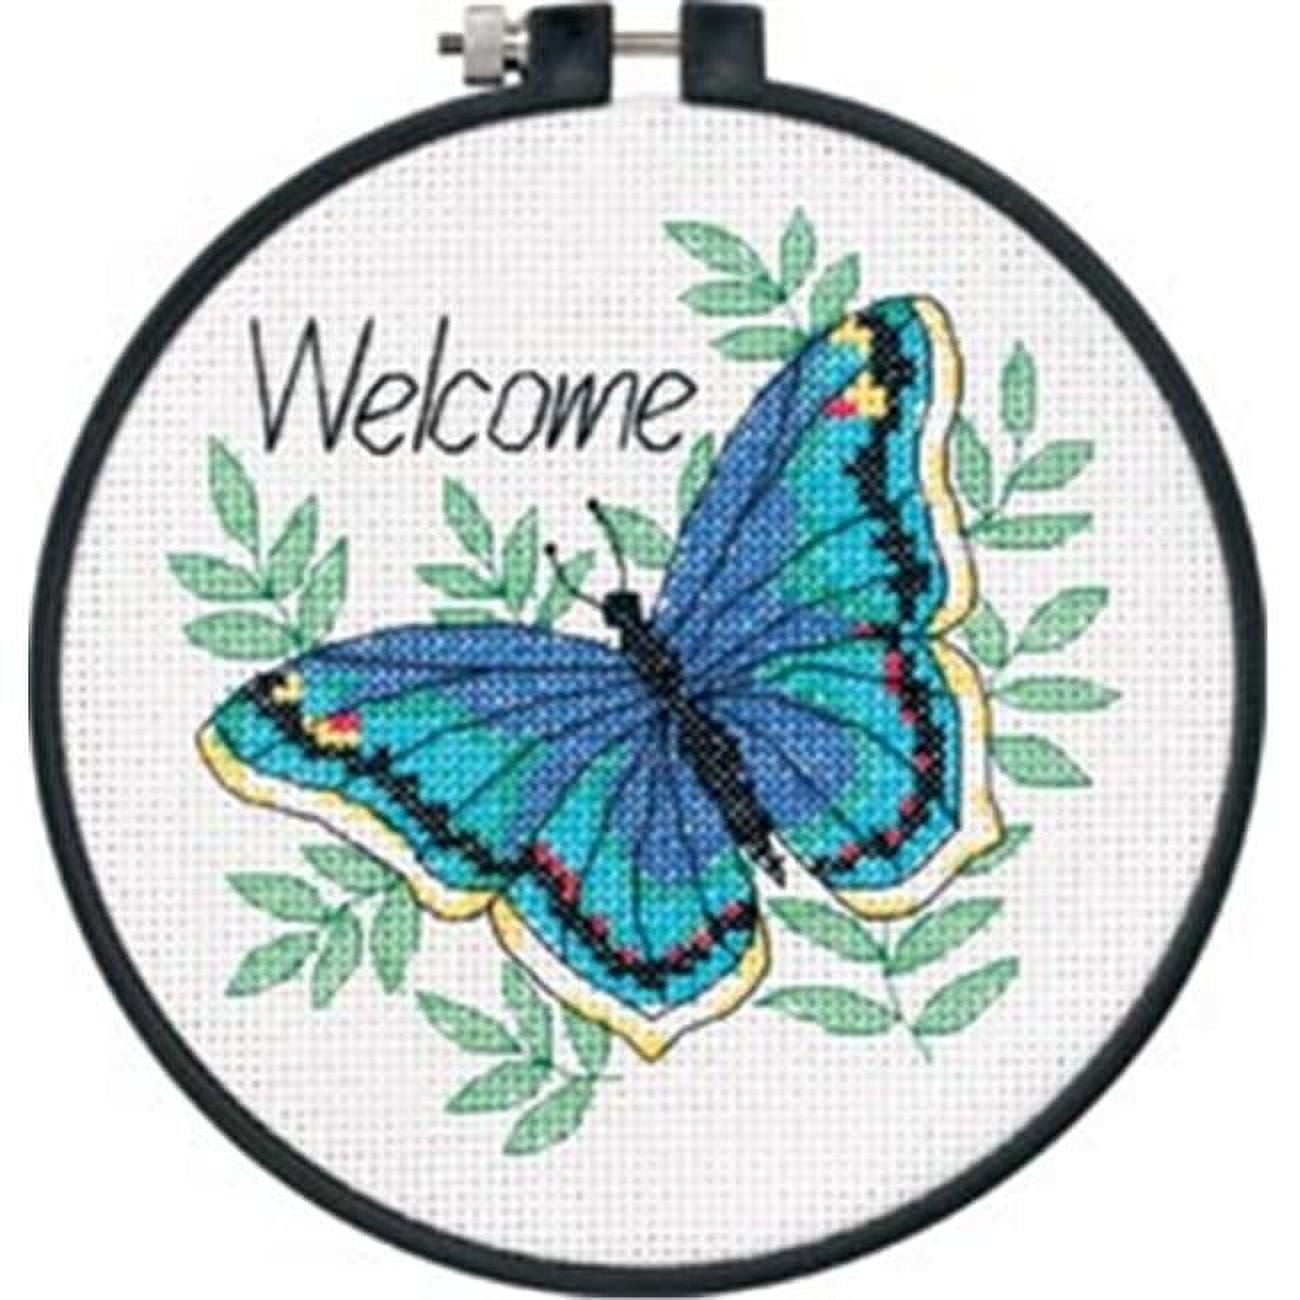 stitch.ly counted cross stitch kits for beginners - adults and kids. 6 cross  stitch patterns, including 1 stamped pattern. al